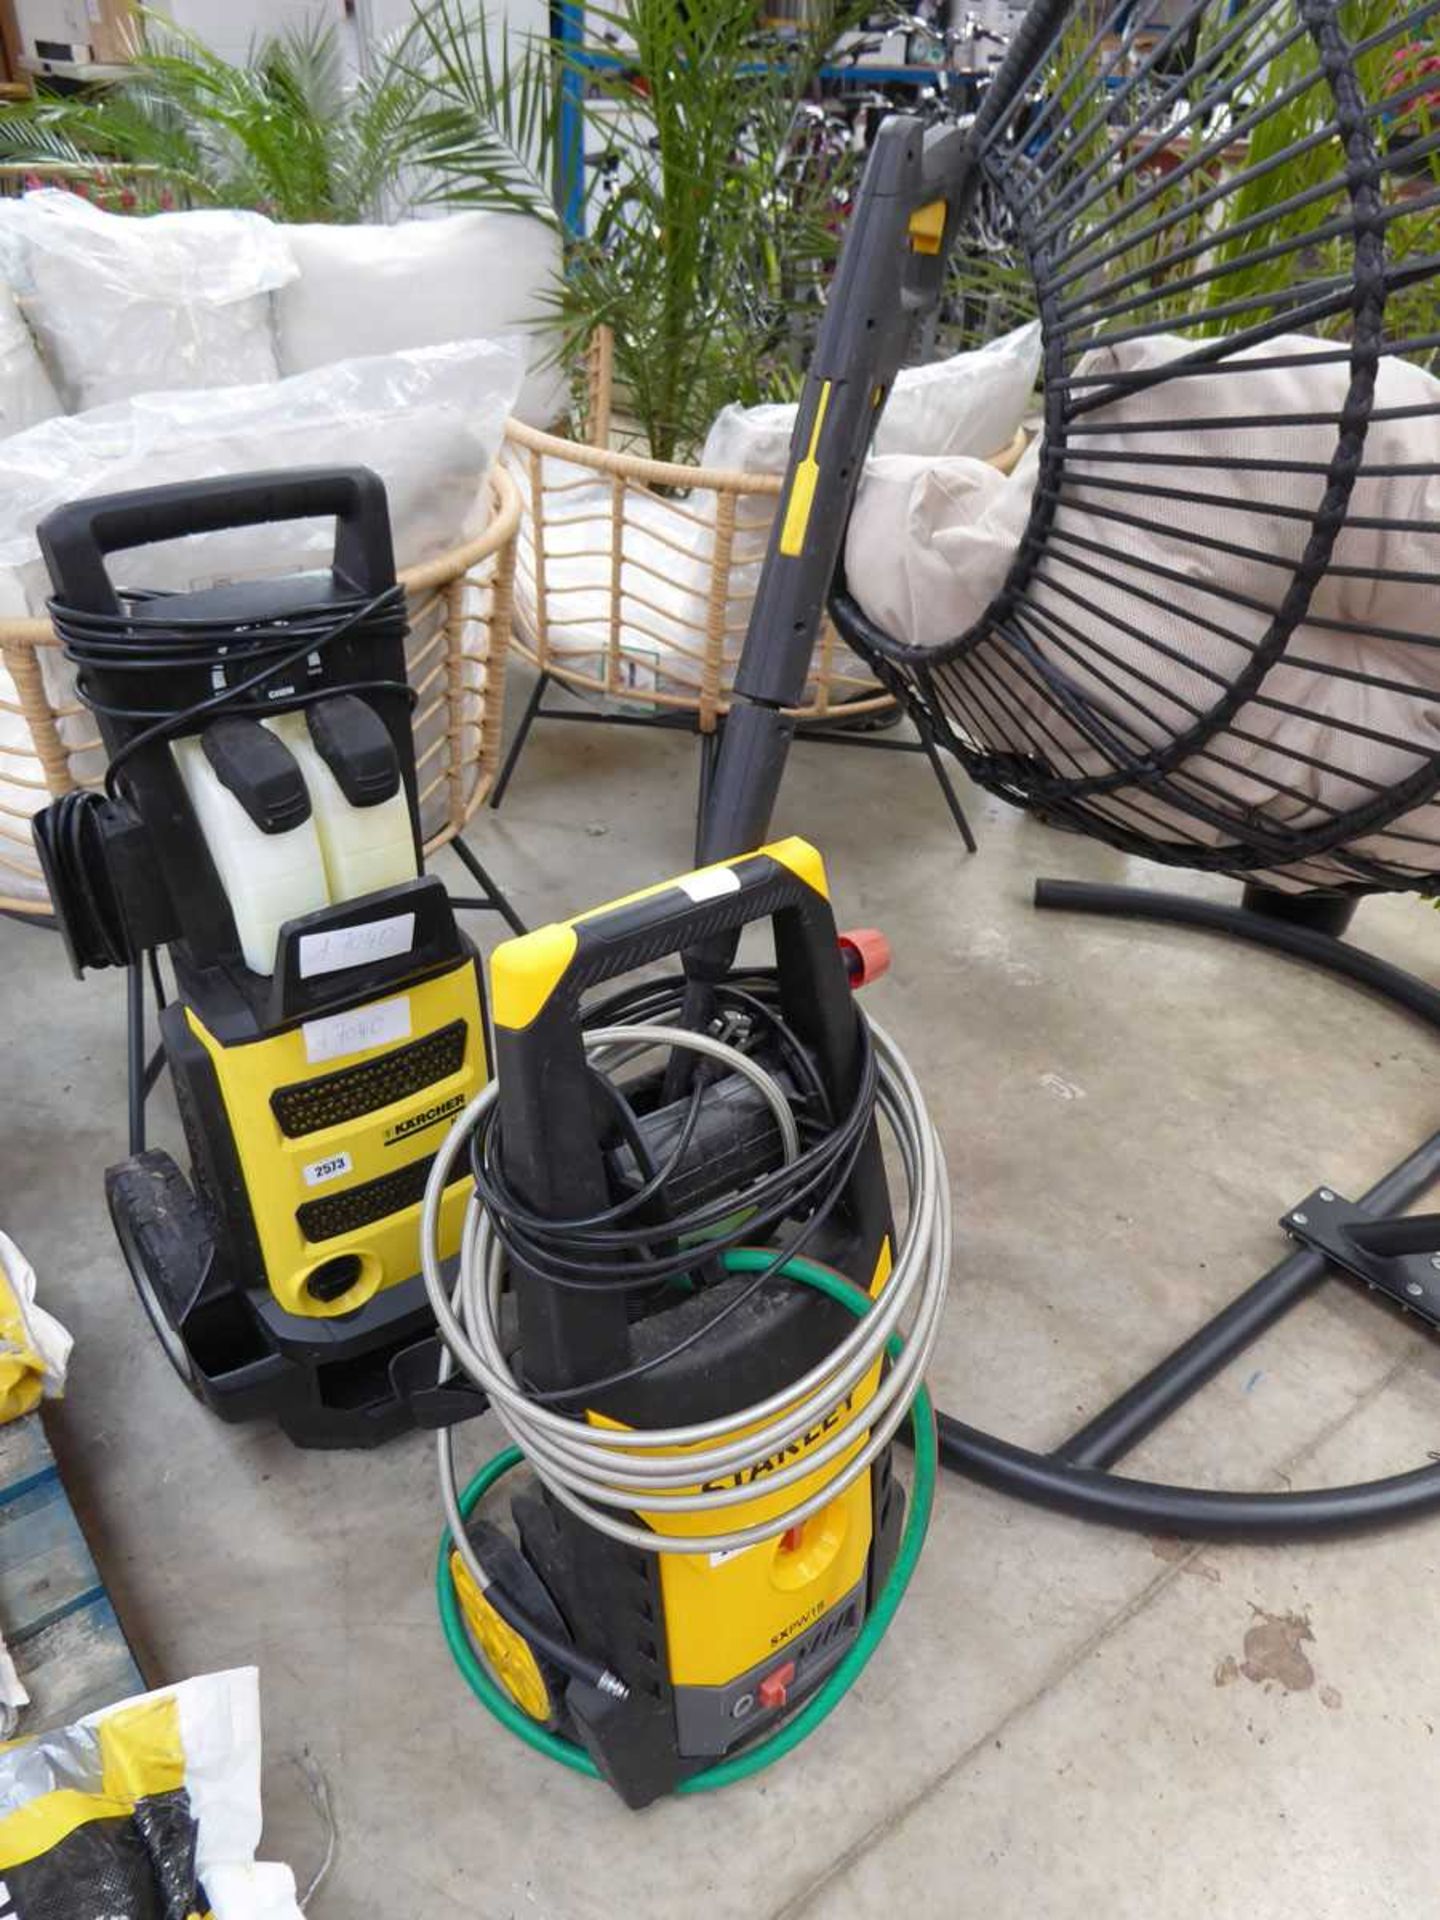 Stanley SXPW18 electric pressure washer with lance and hose